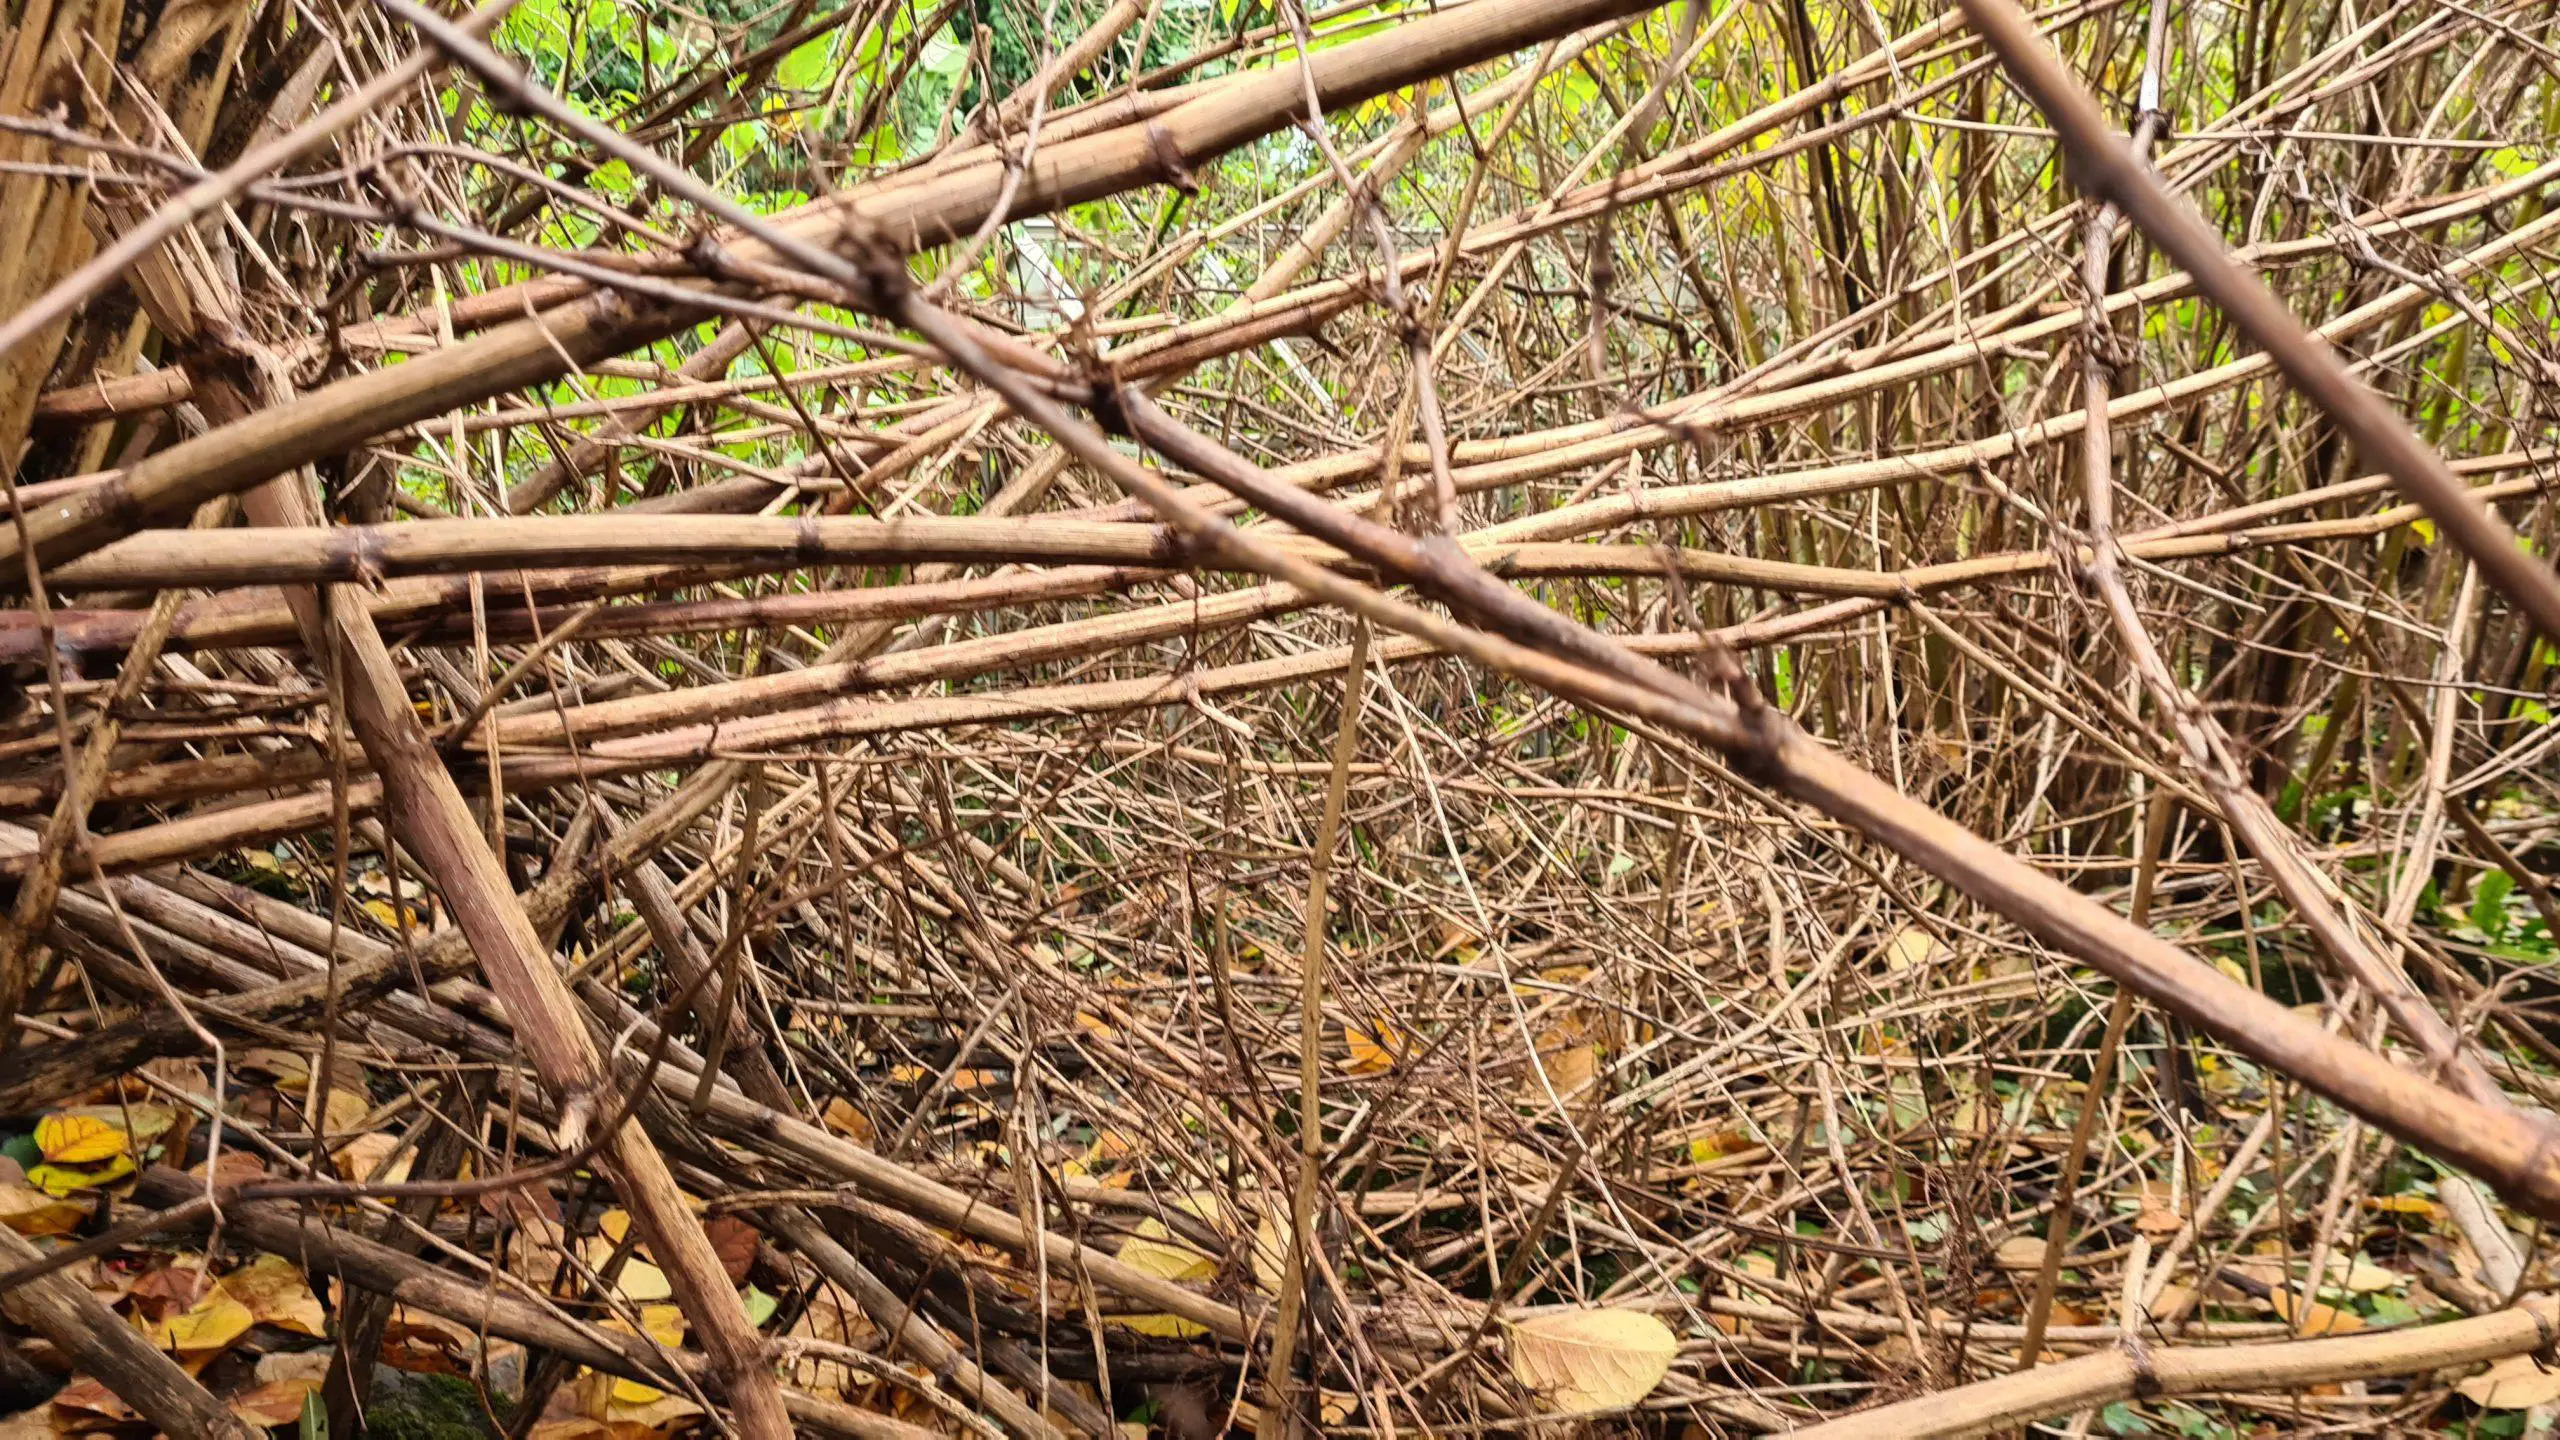 Even during Winter Japanese knotweed consumes a site and makes it hard for anything else to grow